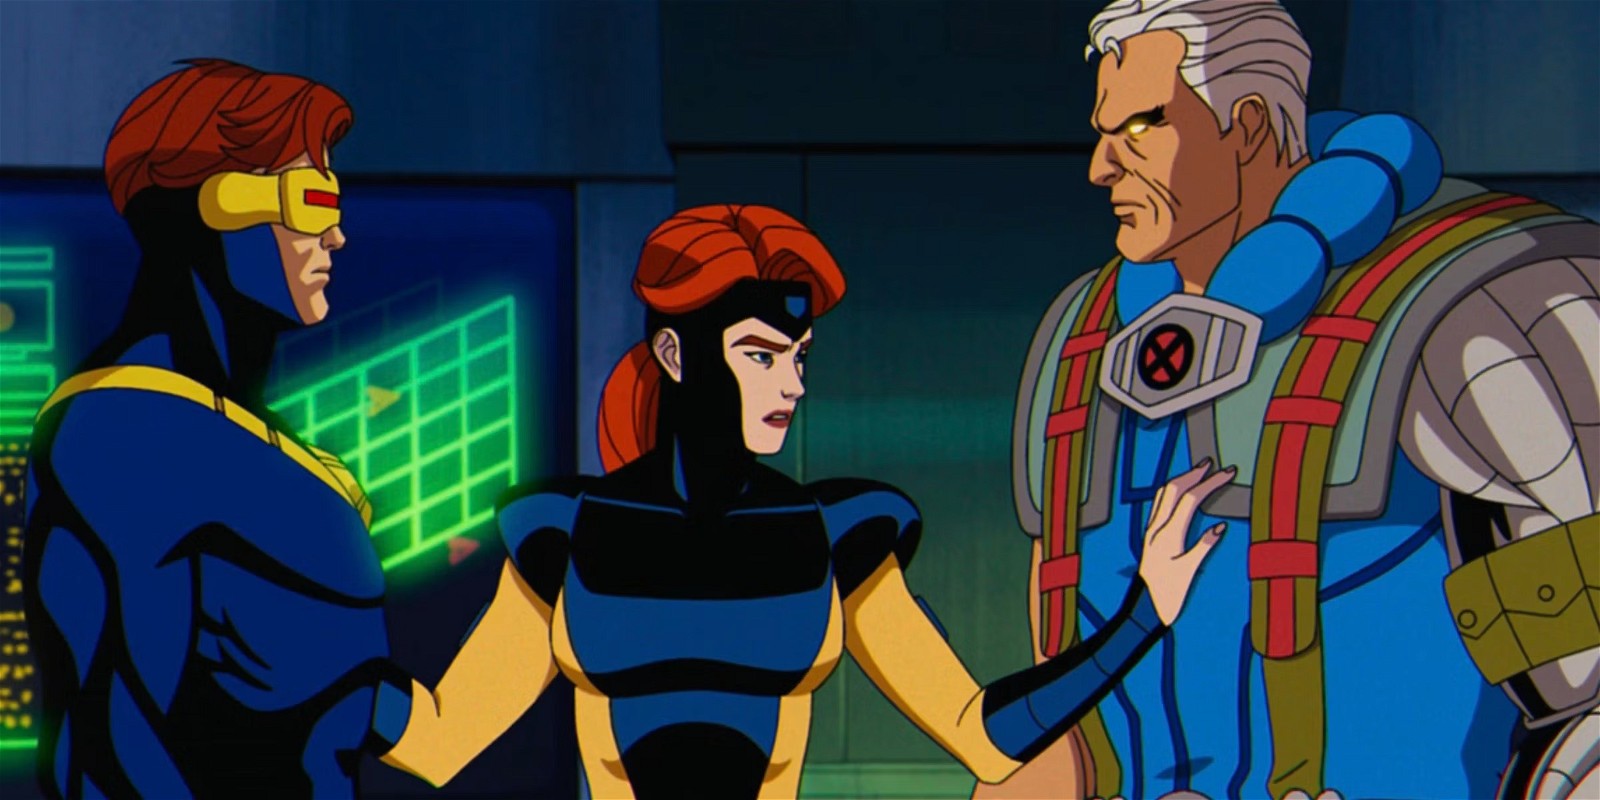 X-Men '97's ending teases an excuting futur for our vbleoved heroes | Marvel Animation